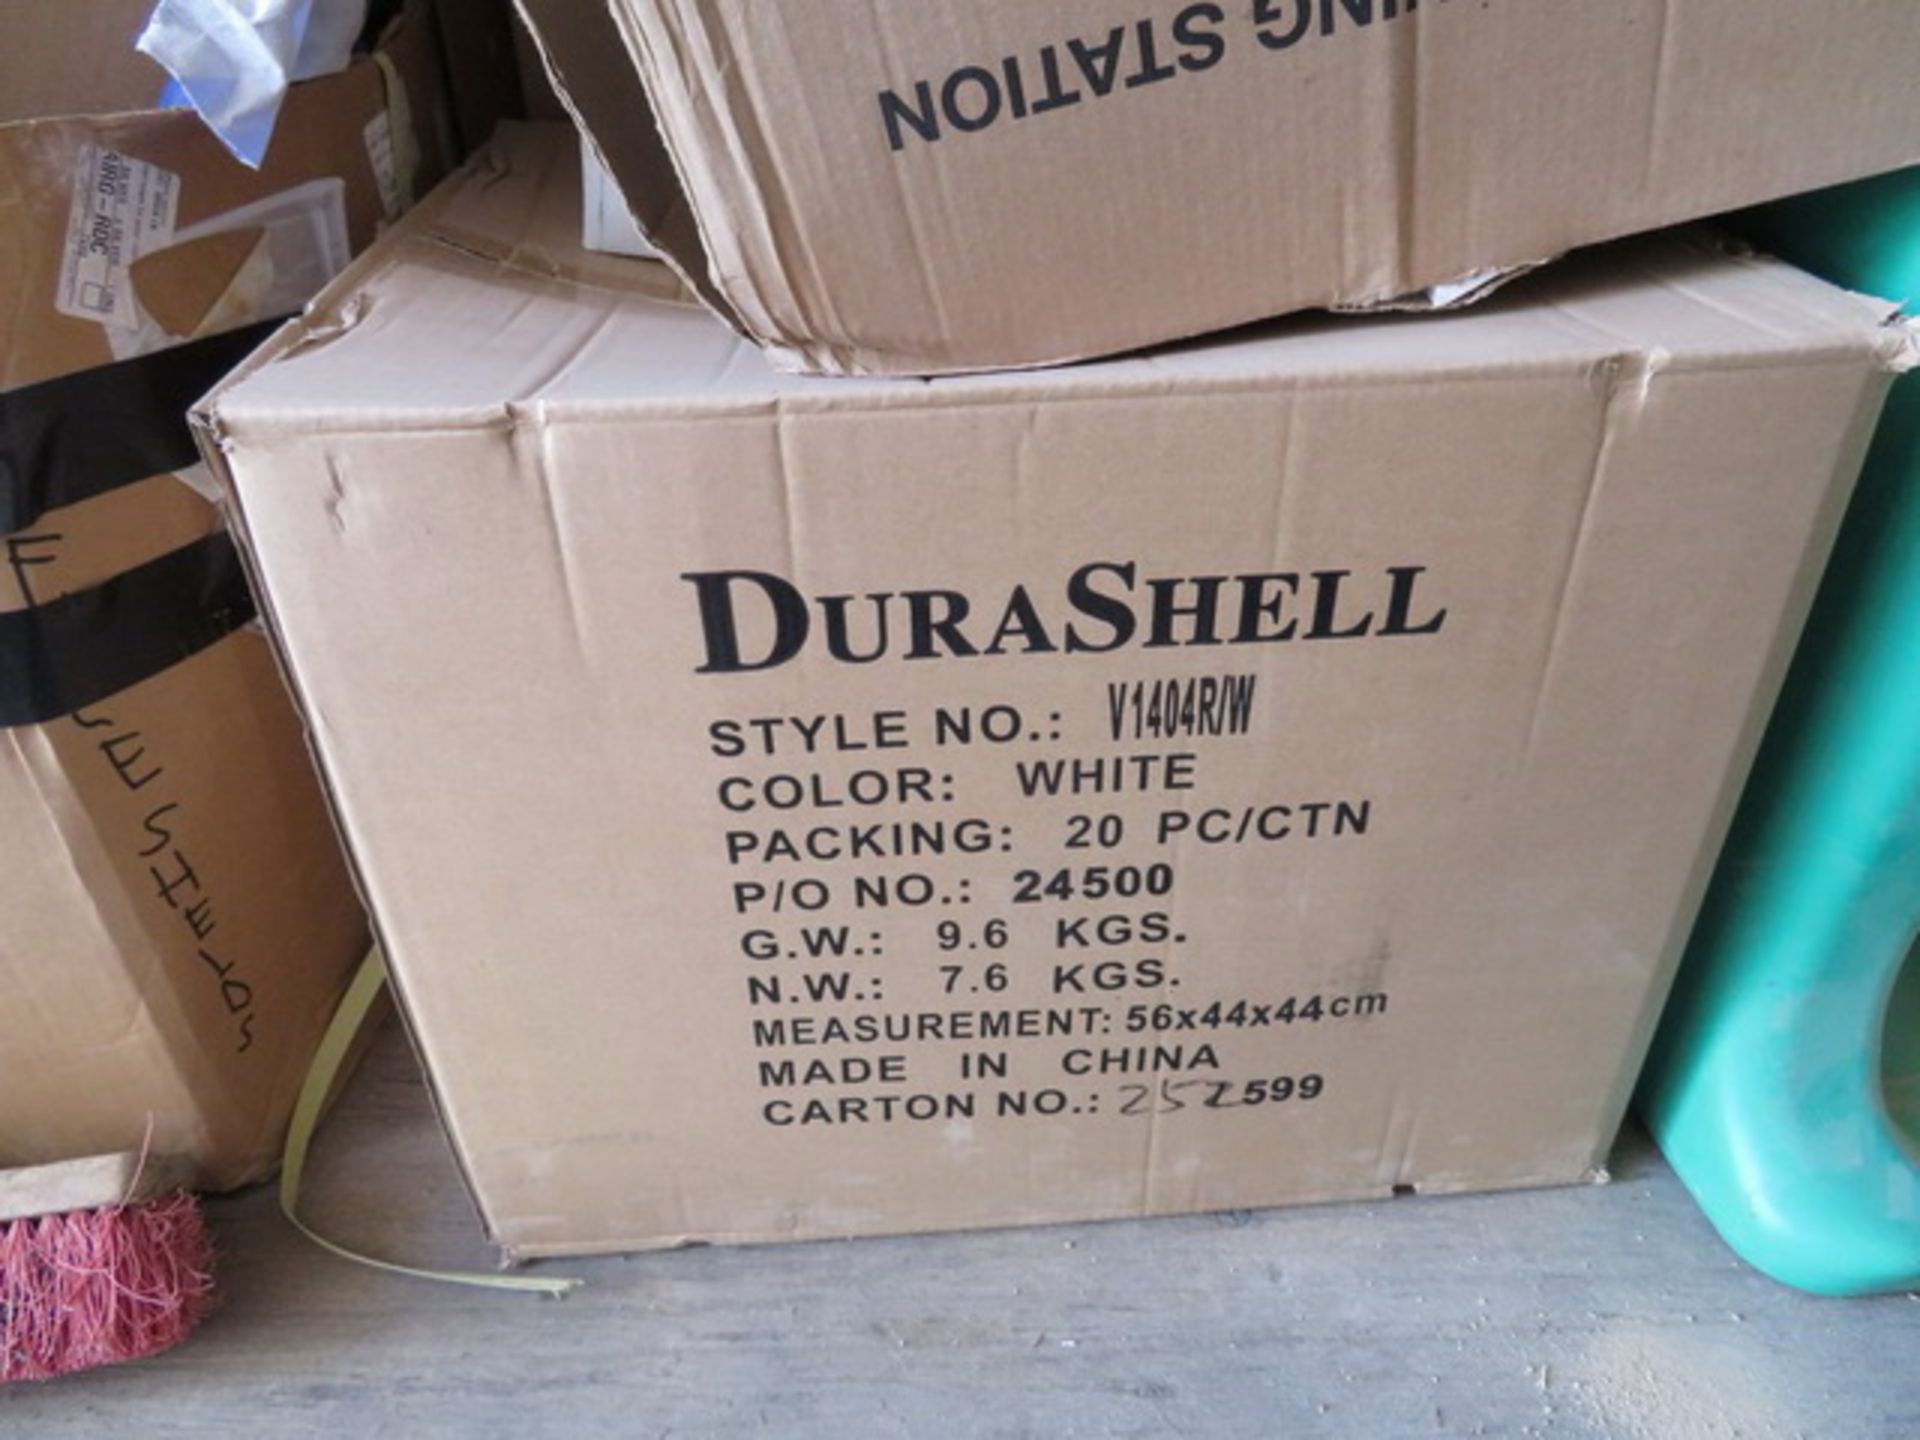 Contents of Shipping Container. To Include 1/2" PVDF Tubing, Safety Glasses, Safety Signs, - Image 17 of 51